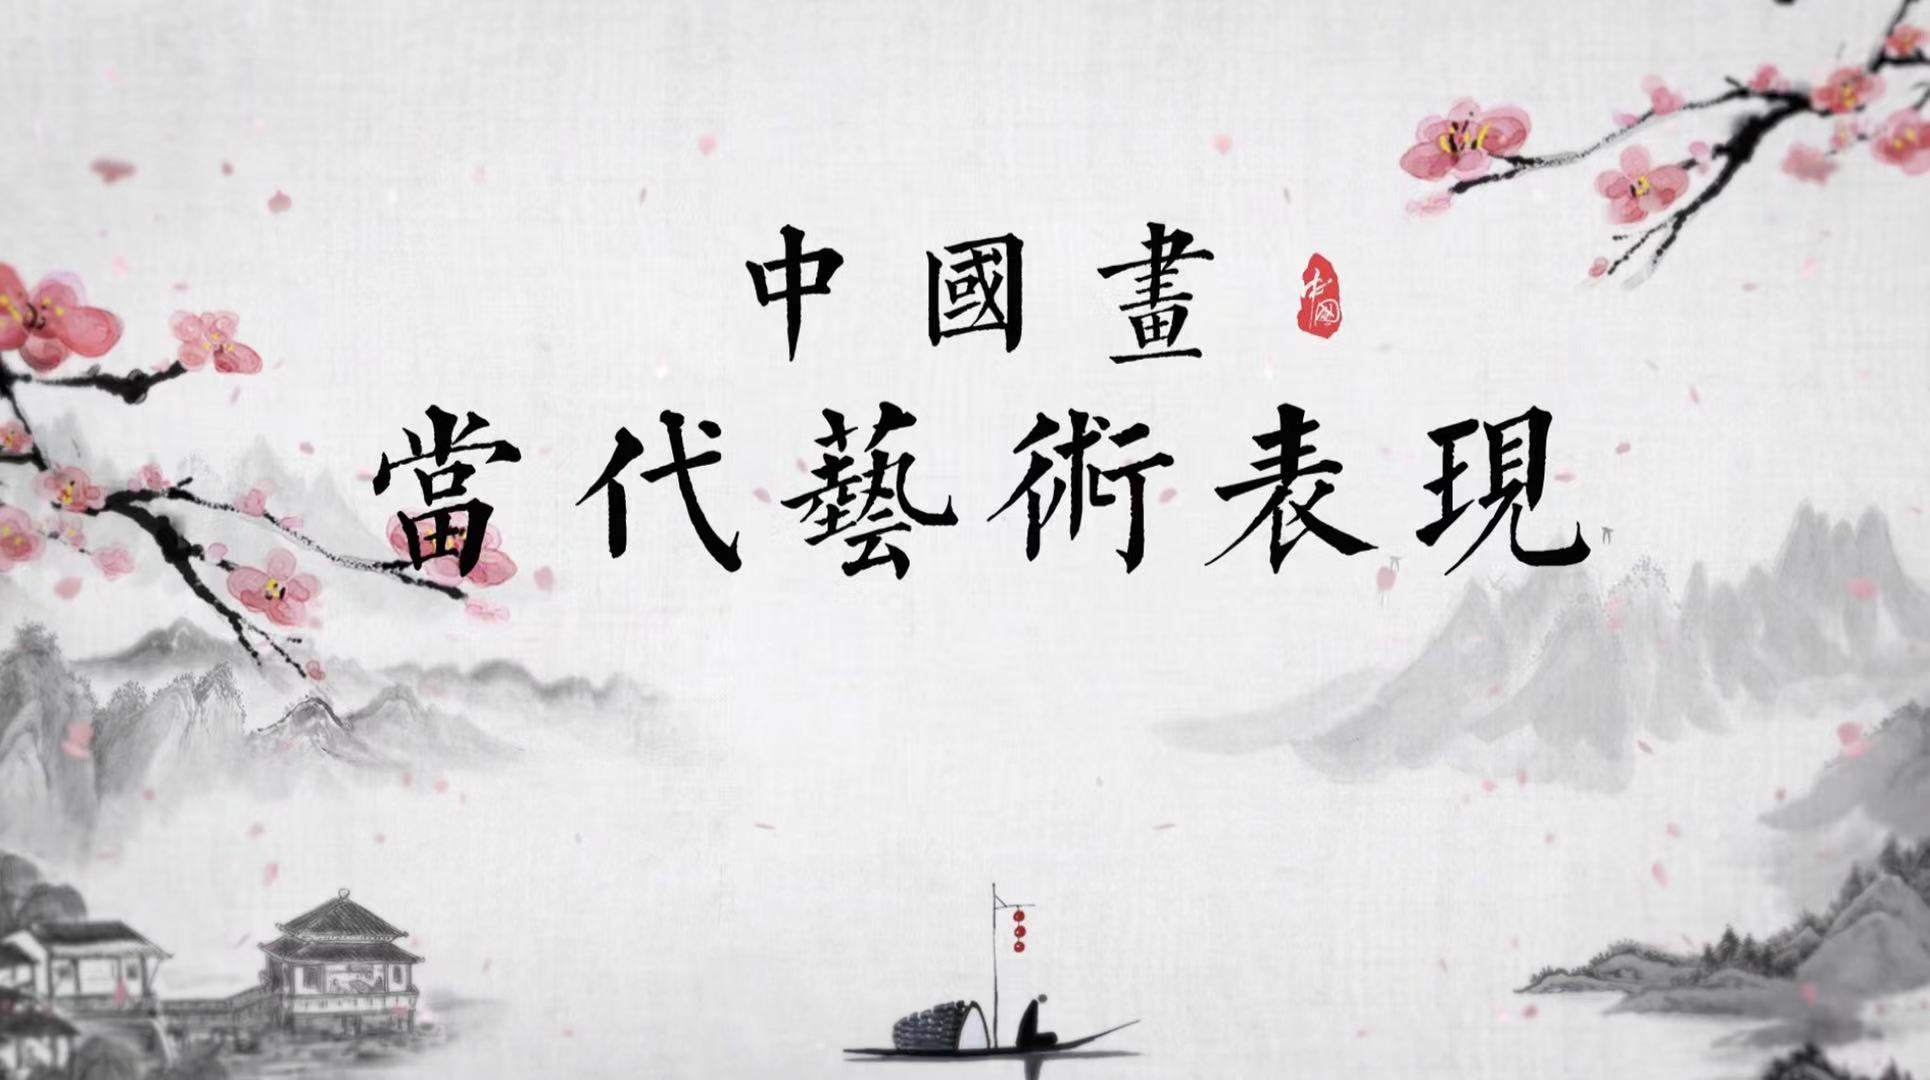 Contemporary artistic expression of Chinese painting